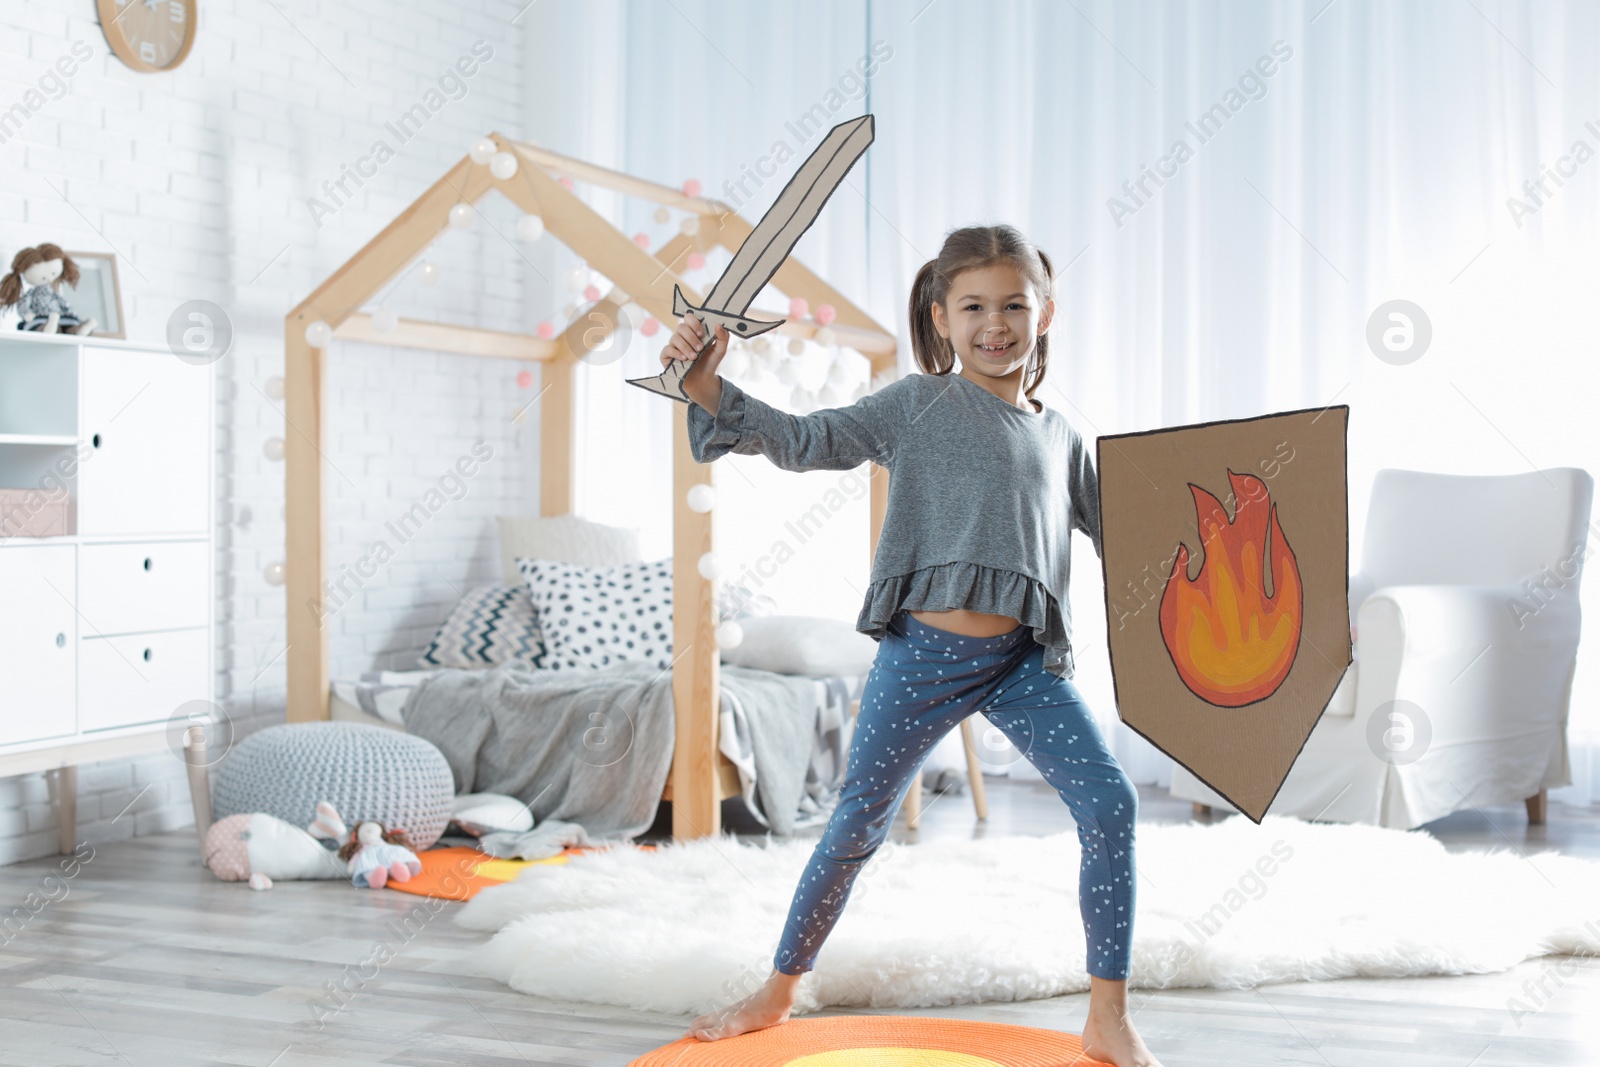 Photo of Cute little girl playing with cardboard armor in bedroom